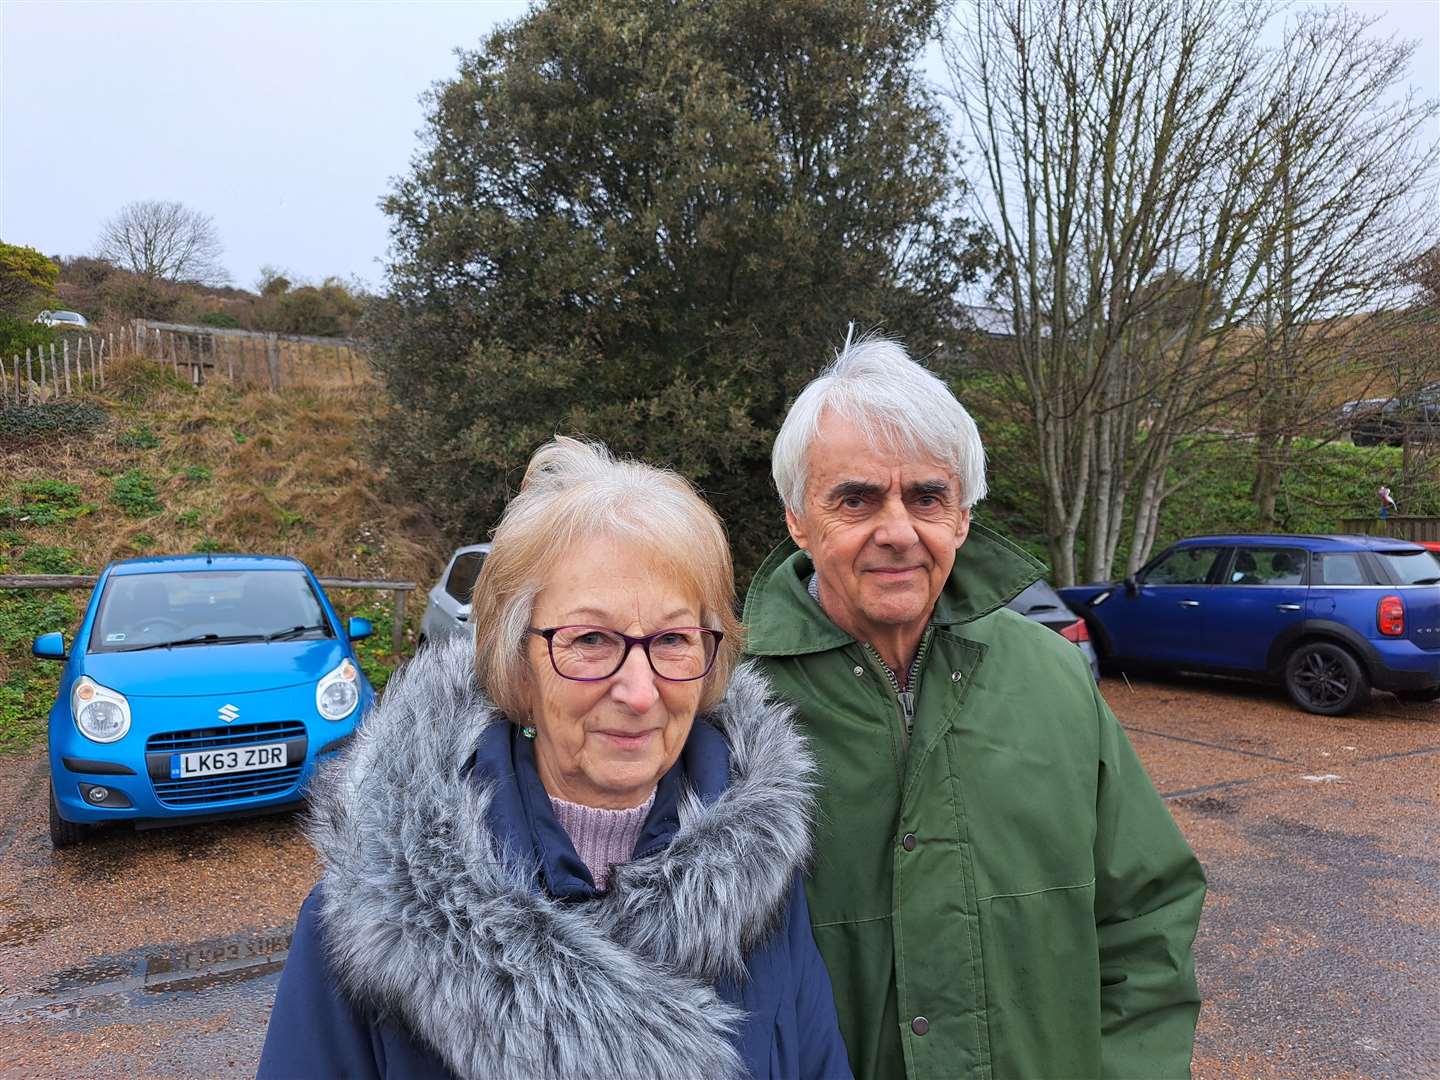 Twins Gill and Glenn Sanders, from Shepherdswell, were walking the White Cliffs and spoke of the immigration issues which Rishi Sunak visited Dover to meet border control teams about